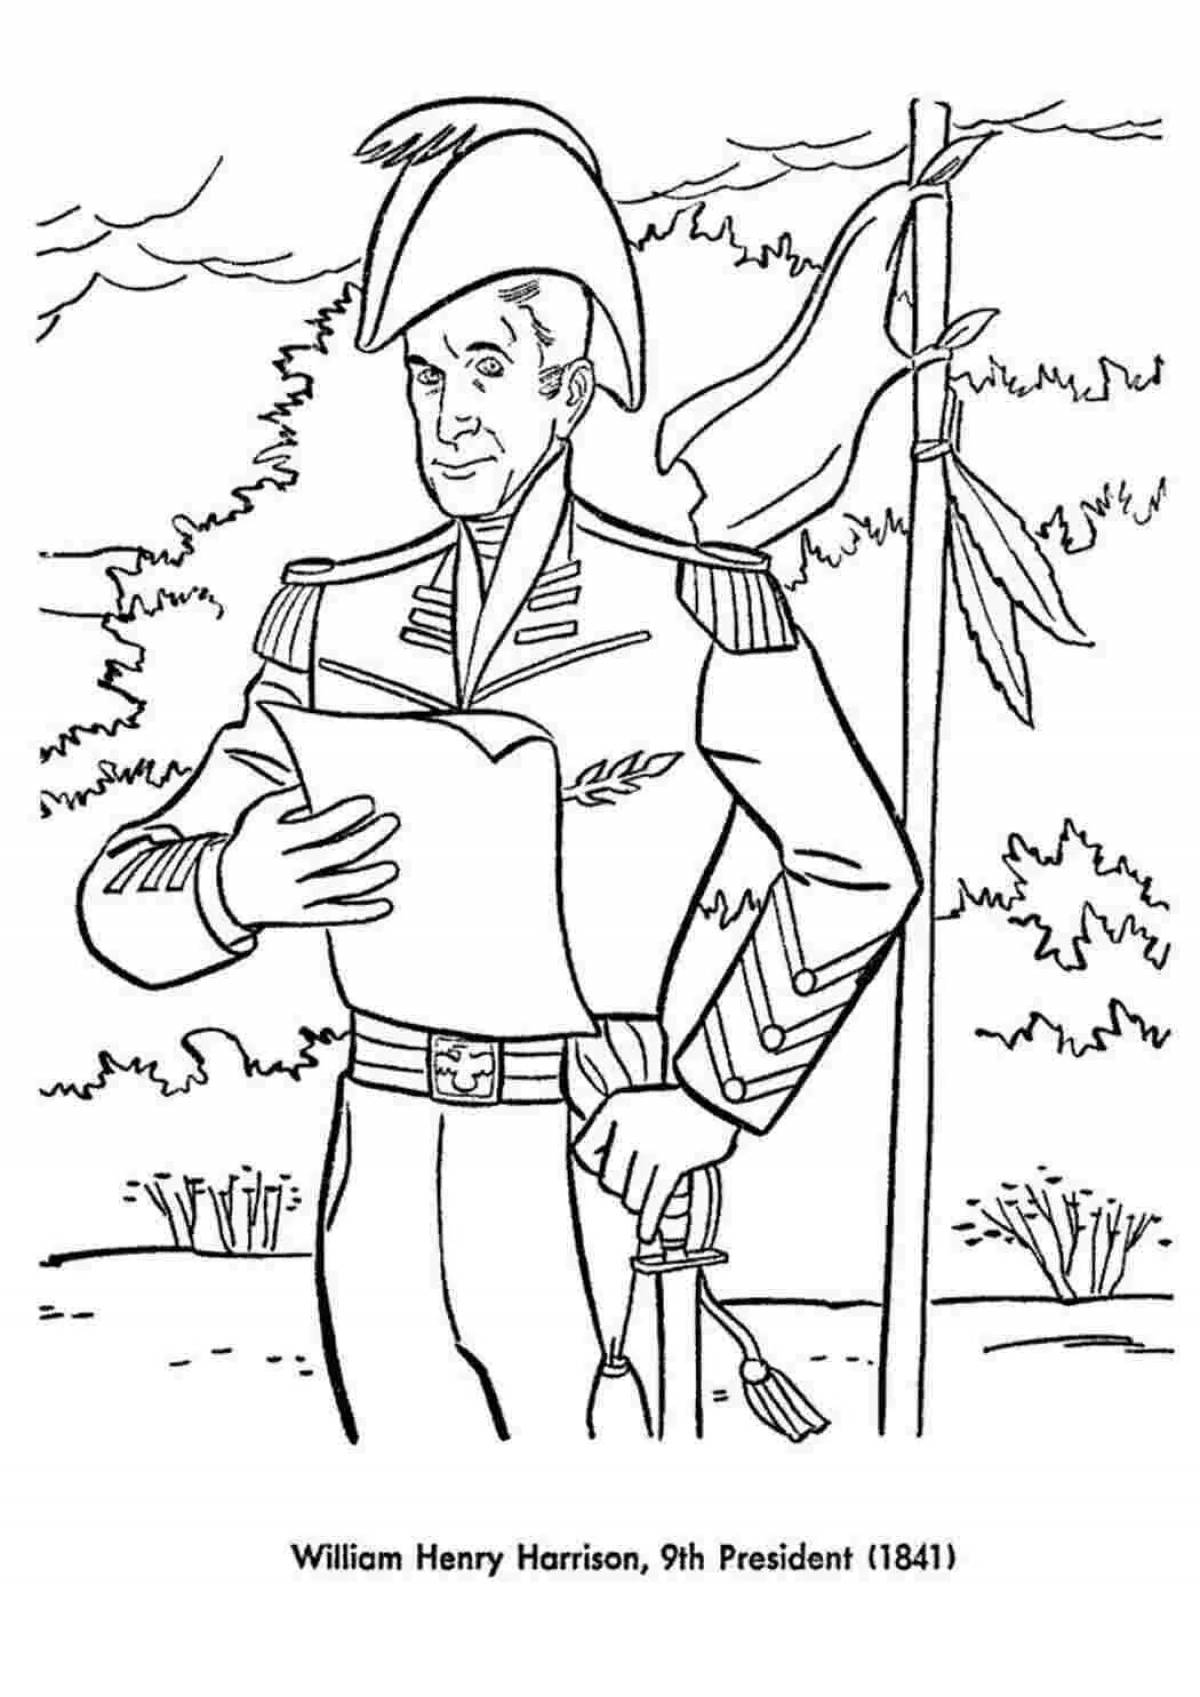 Adorable military coloring book for kids